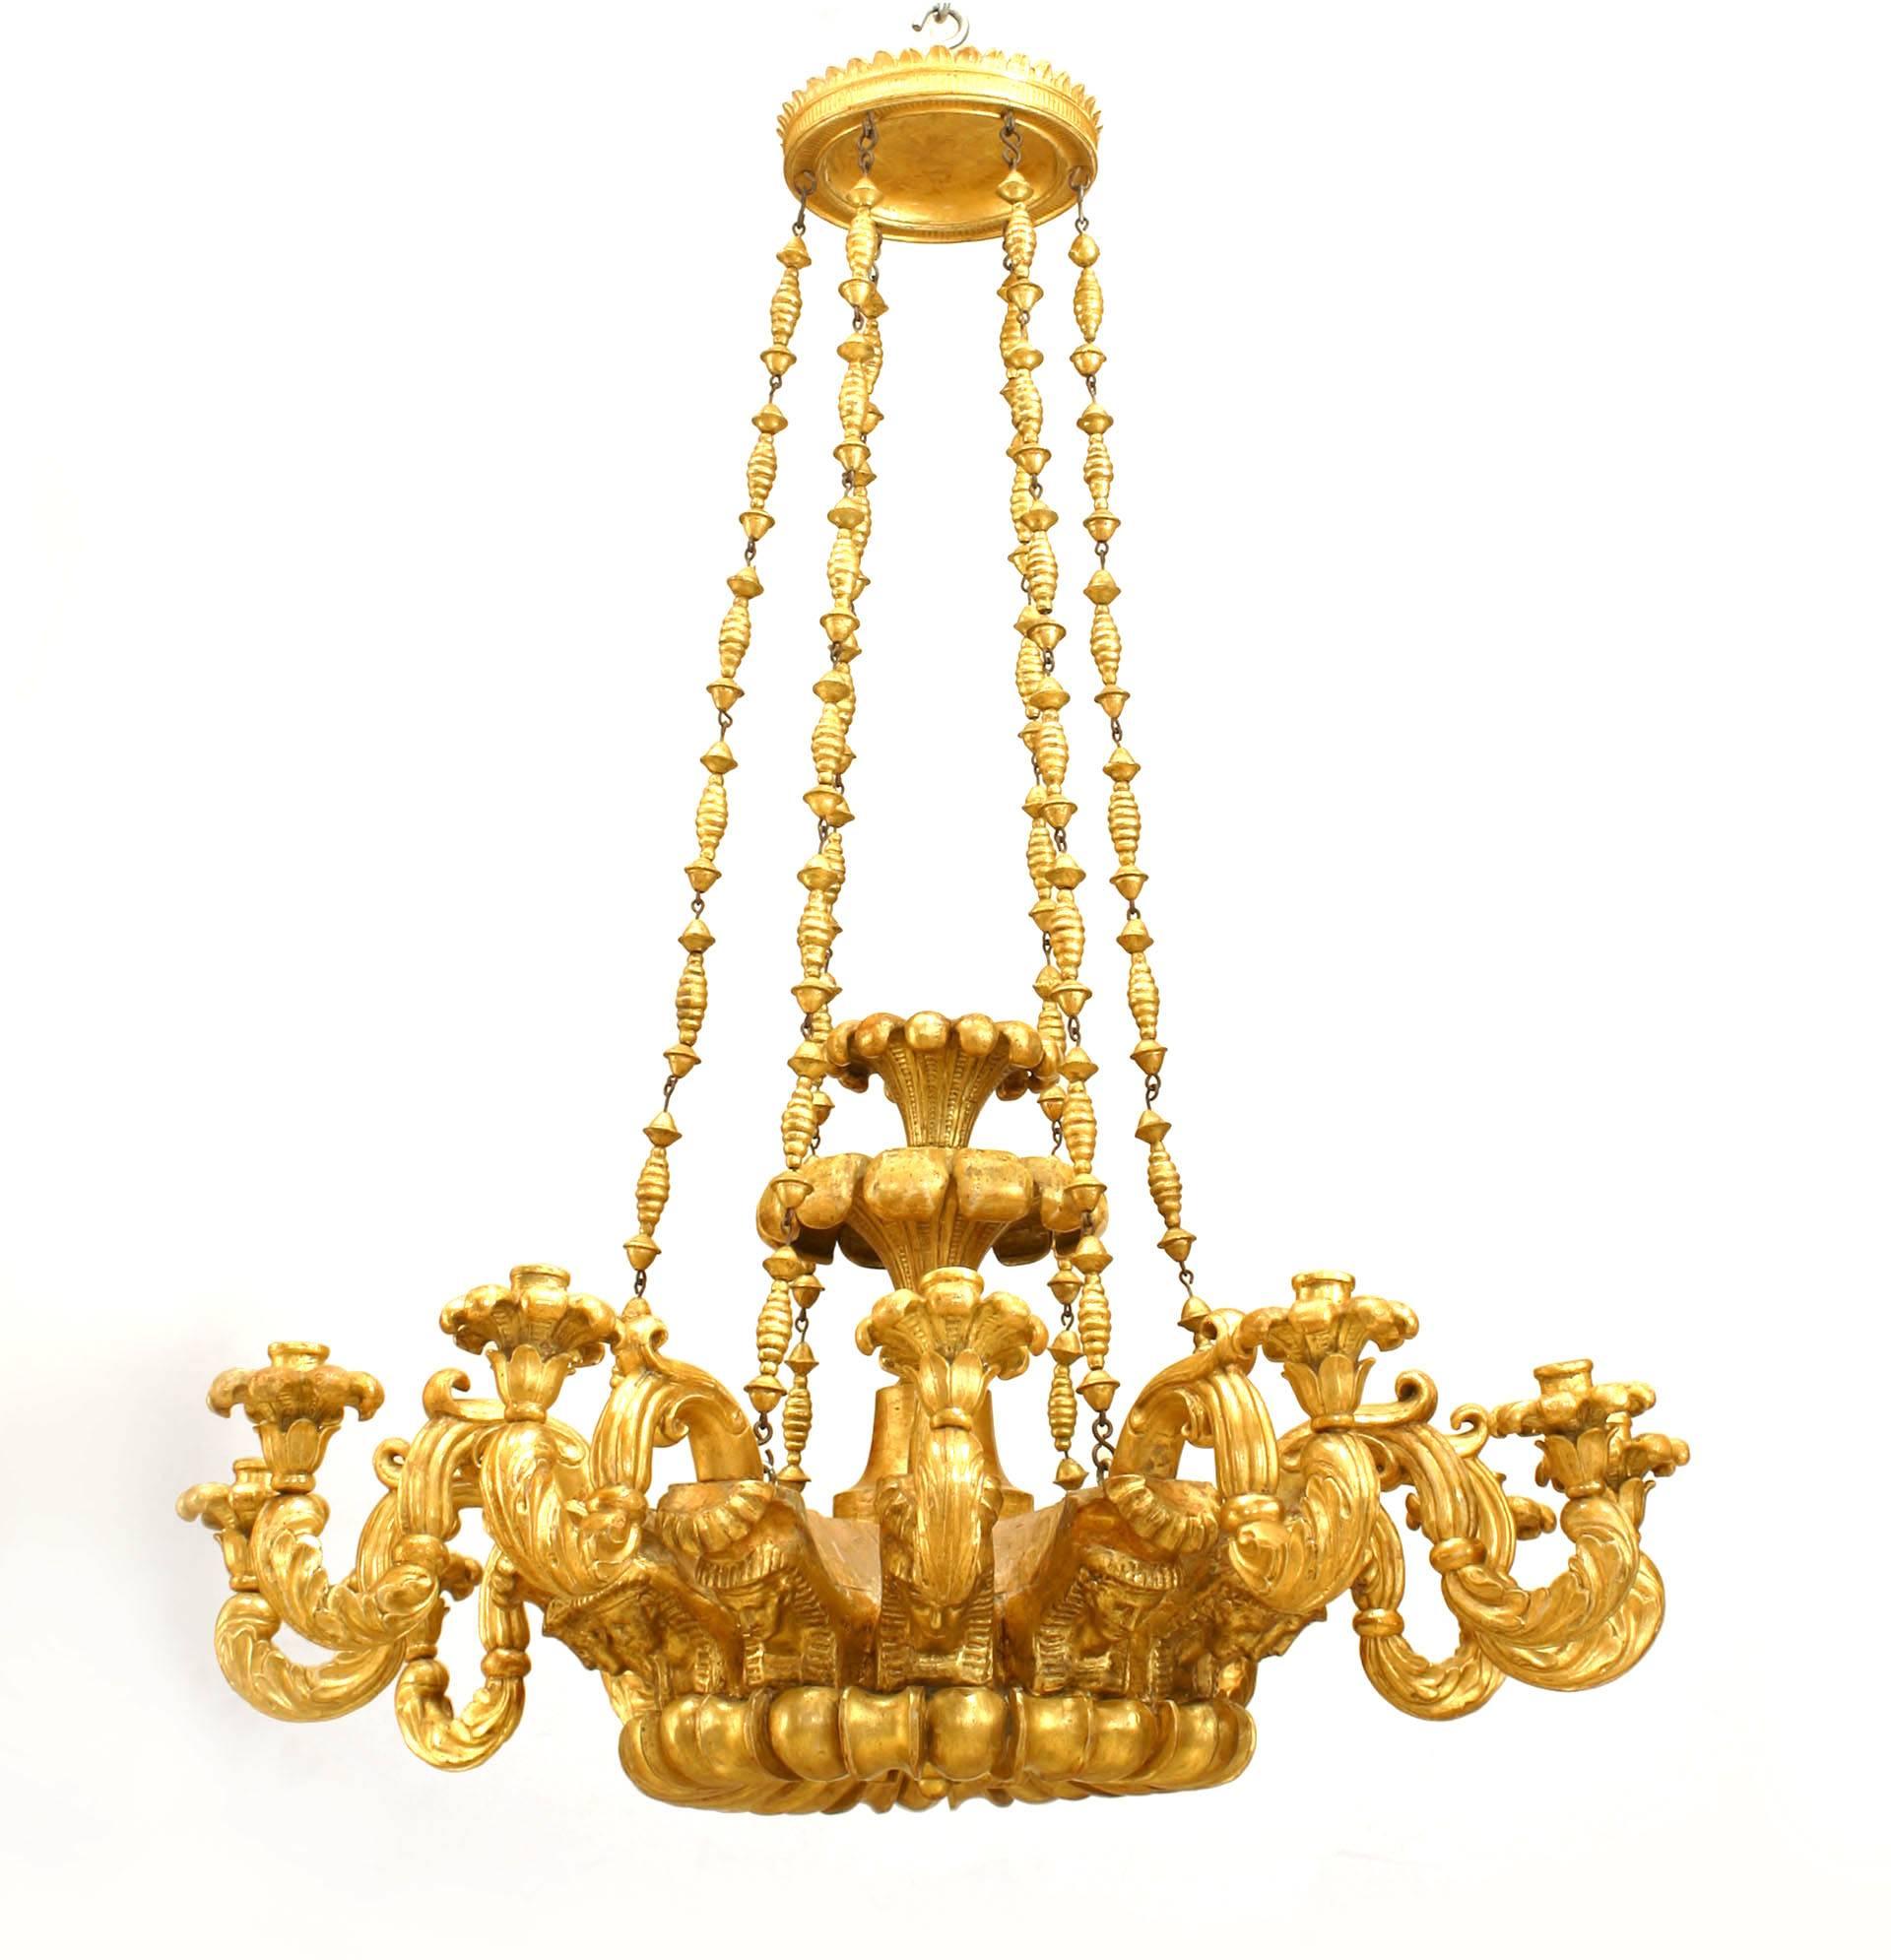 Italian Neo-classic (18/19th Century) gilt wood chandelier with 12 arms emanating from a carved fluted & floral round base with Egyptian heads & supported by 6 spool chains.
